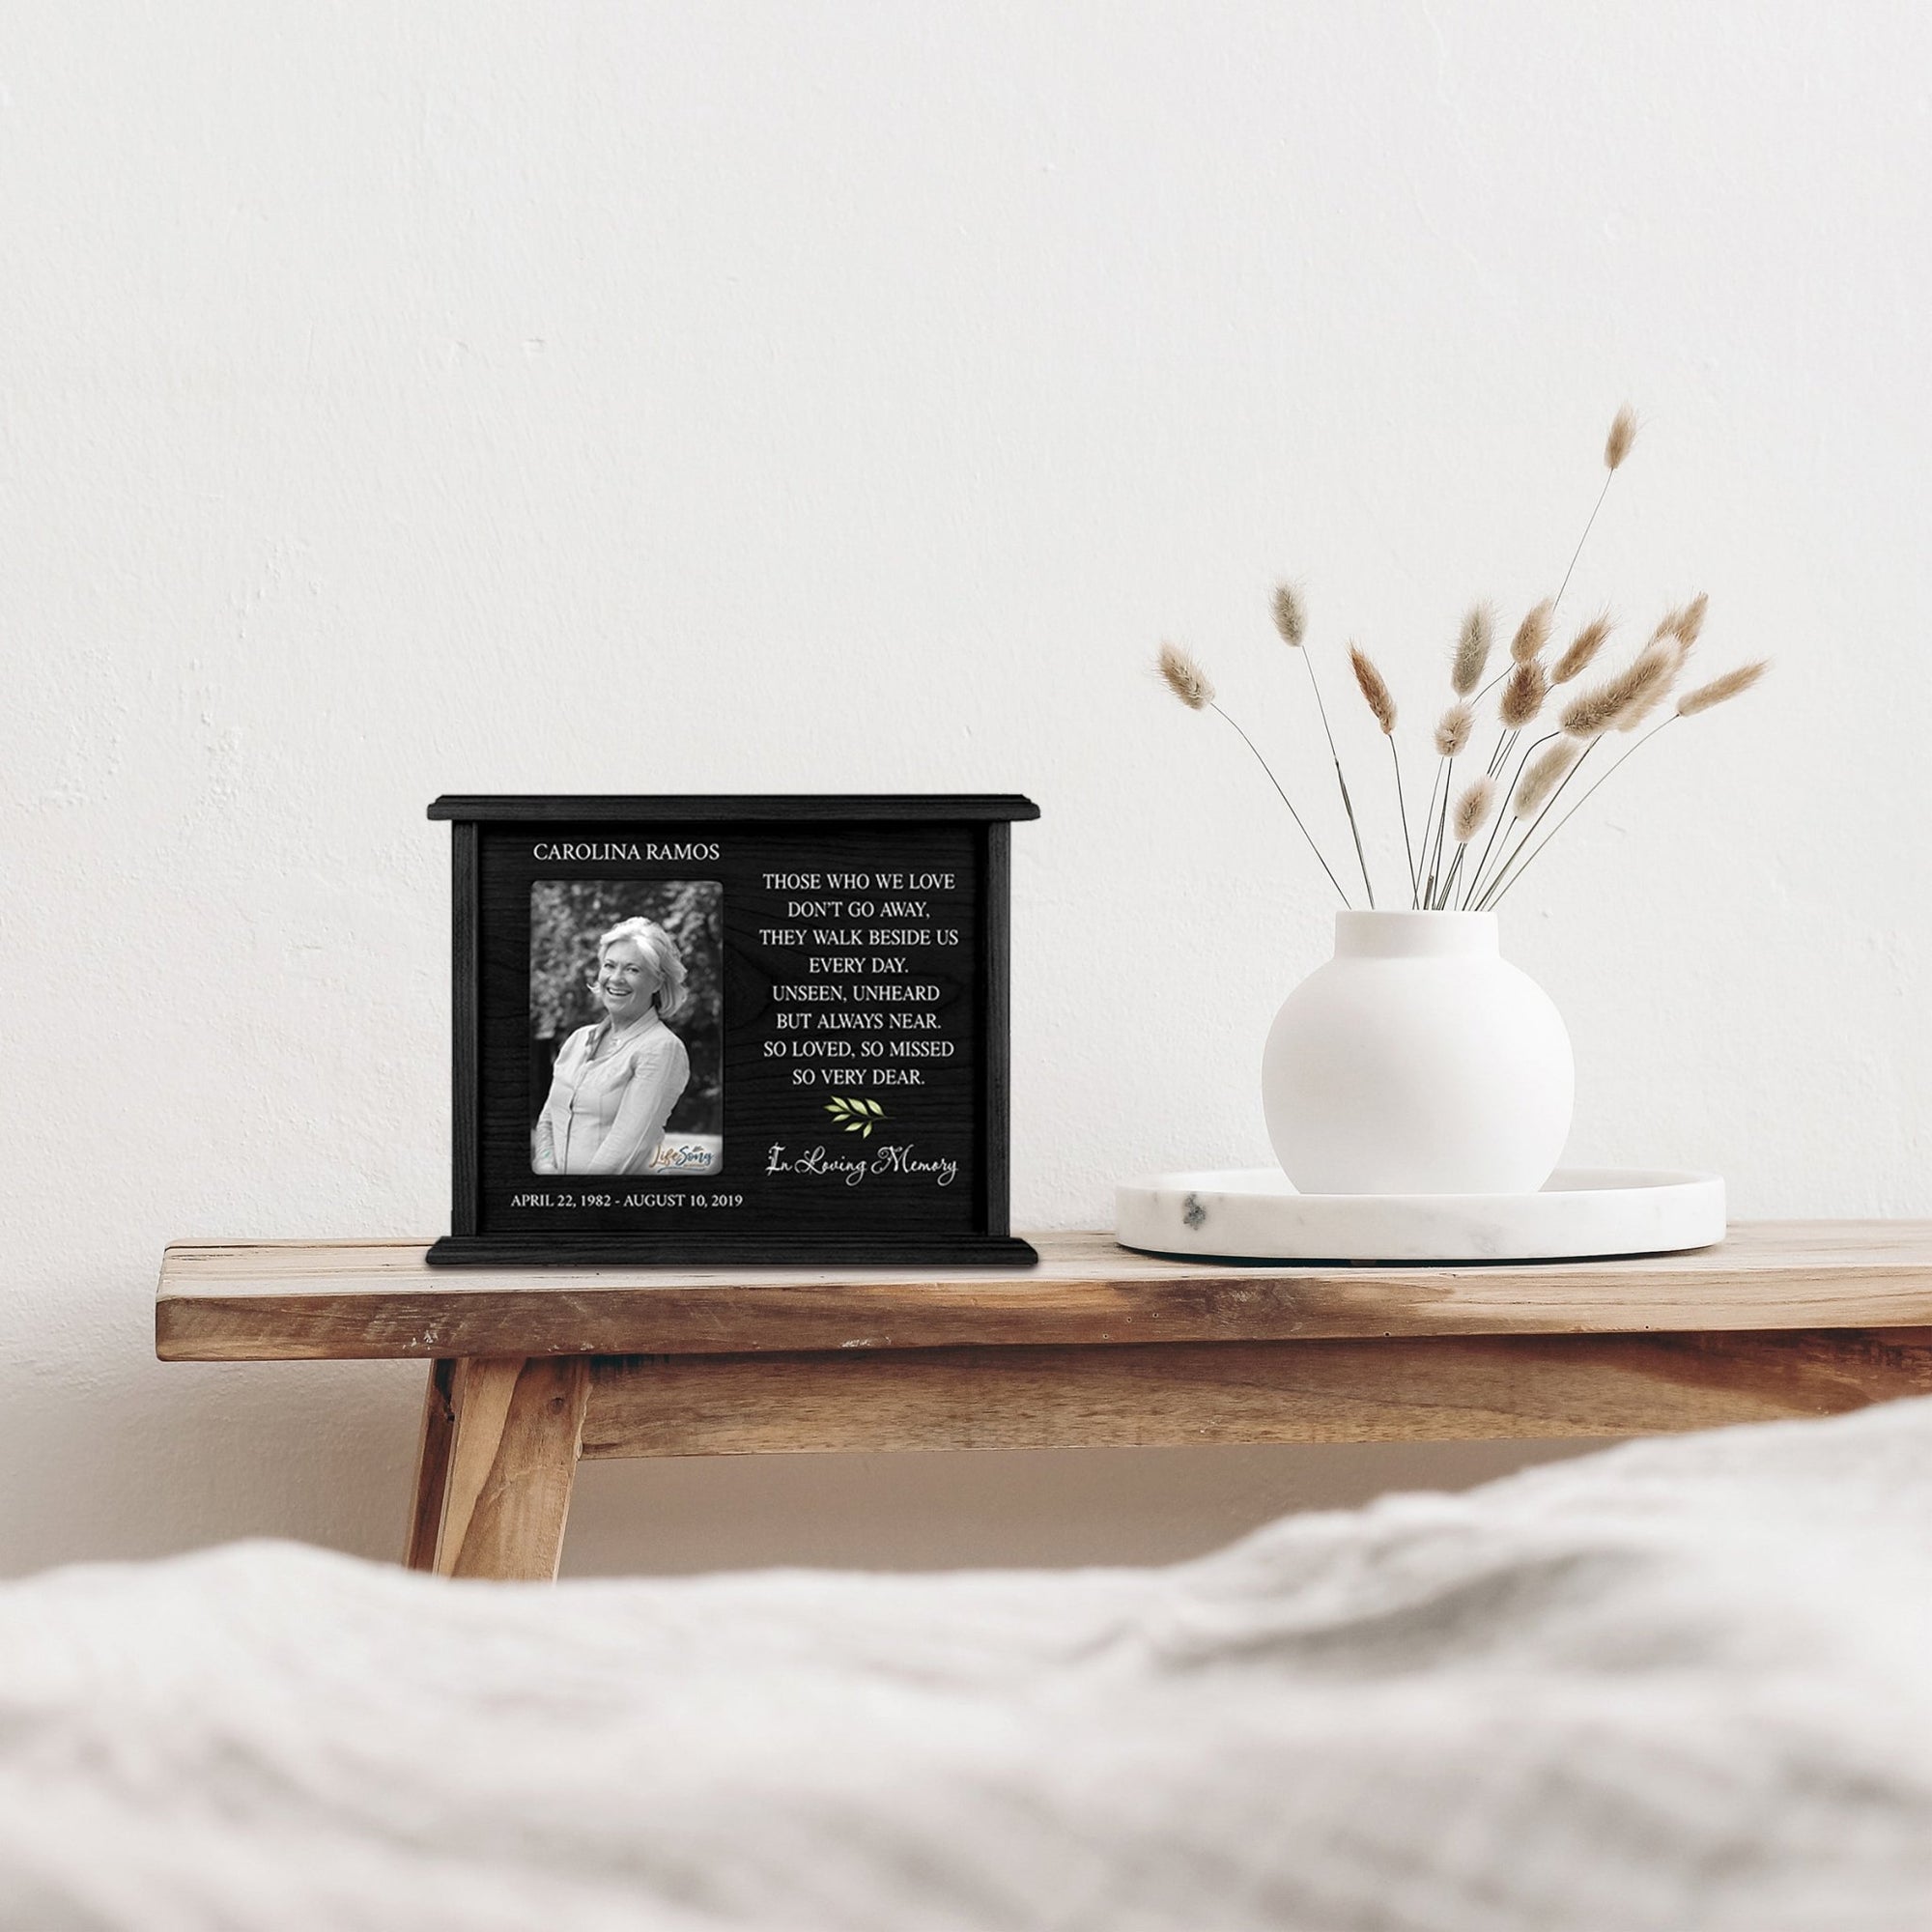 Personalized Wooden Memorial Photo Cremation Urns For Human Ashes - Those Who We Love - LifeSong Milestones